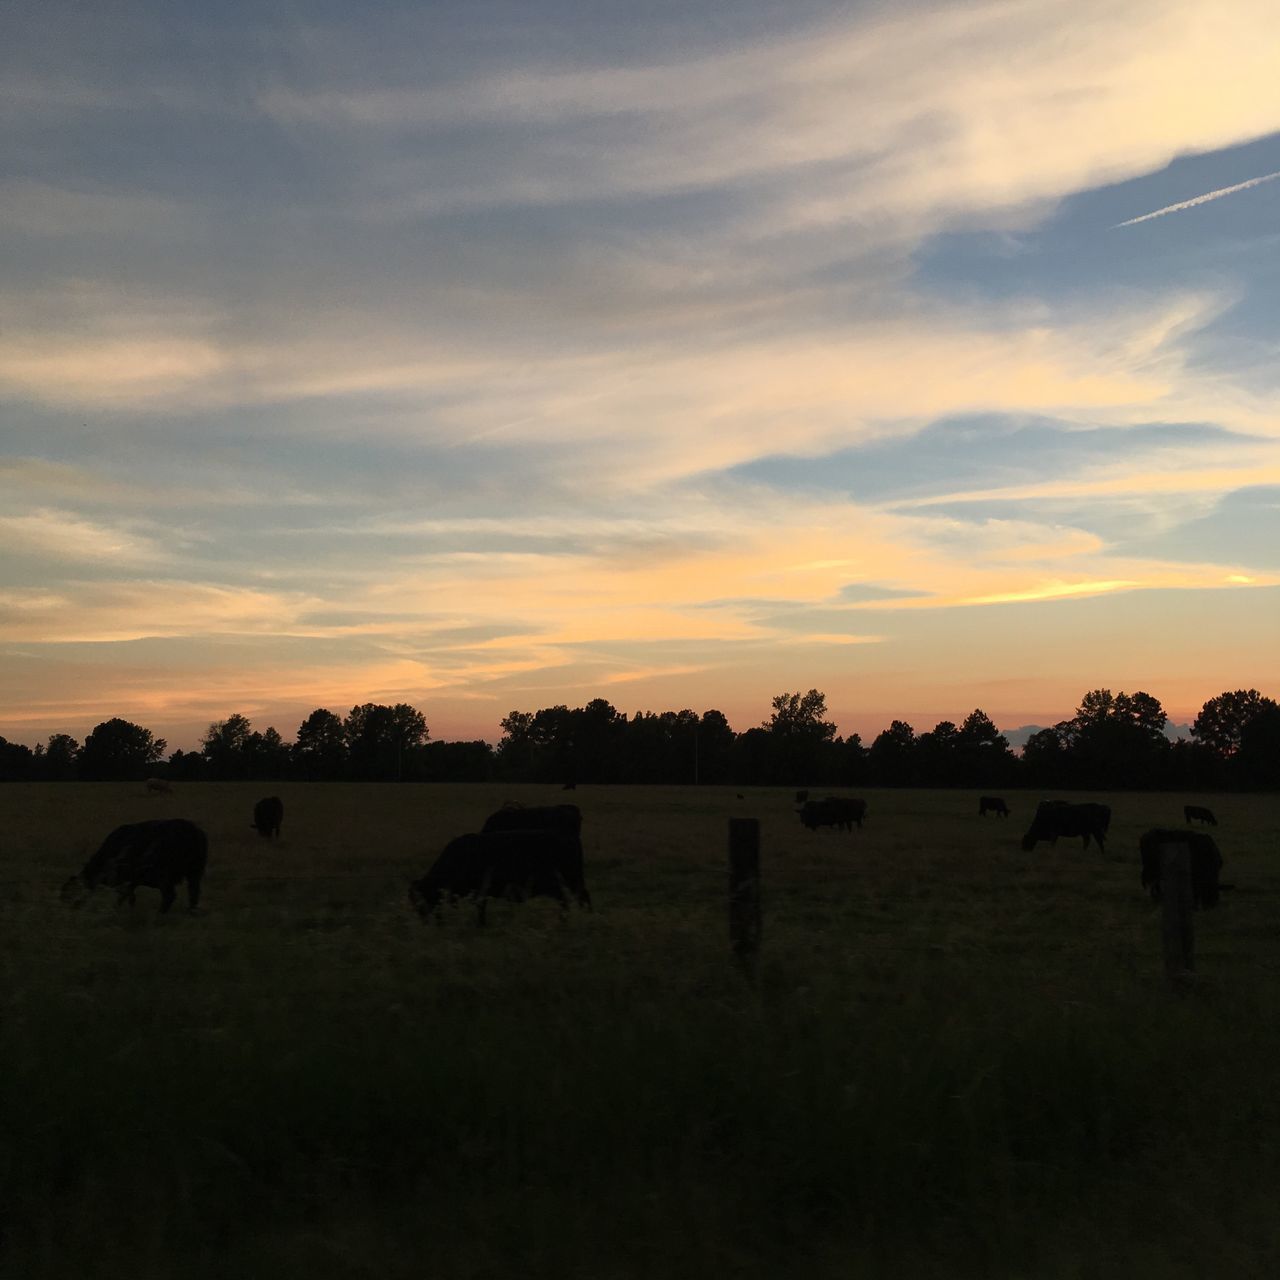 sunset, animal themes, landscape, cloud, field, livestock, domestic animals, mammal, sky, tranquility, herbivorous, tranquil scene, nature, solitude, scenics, beauty in nature, no people, pasture, remote, countryside, cloud - sky, rural scene